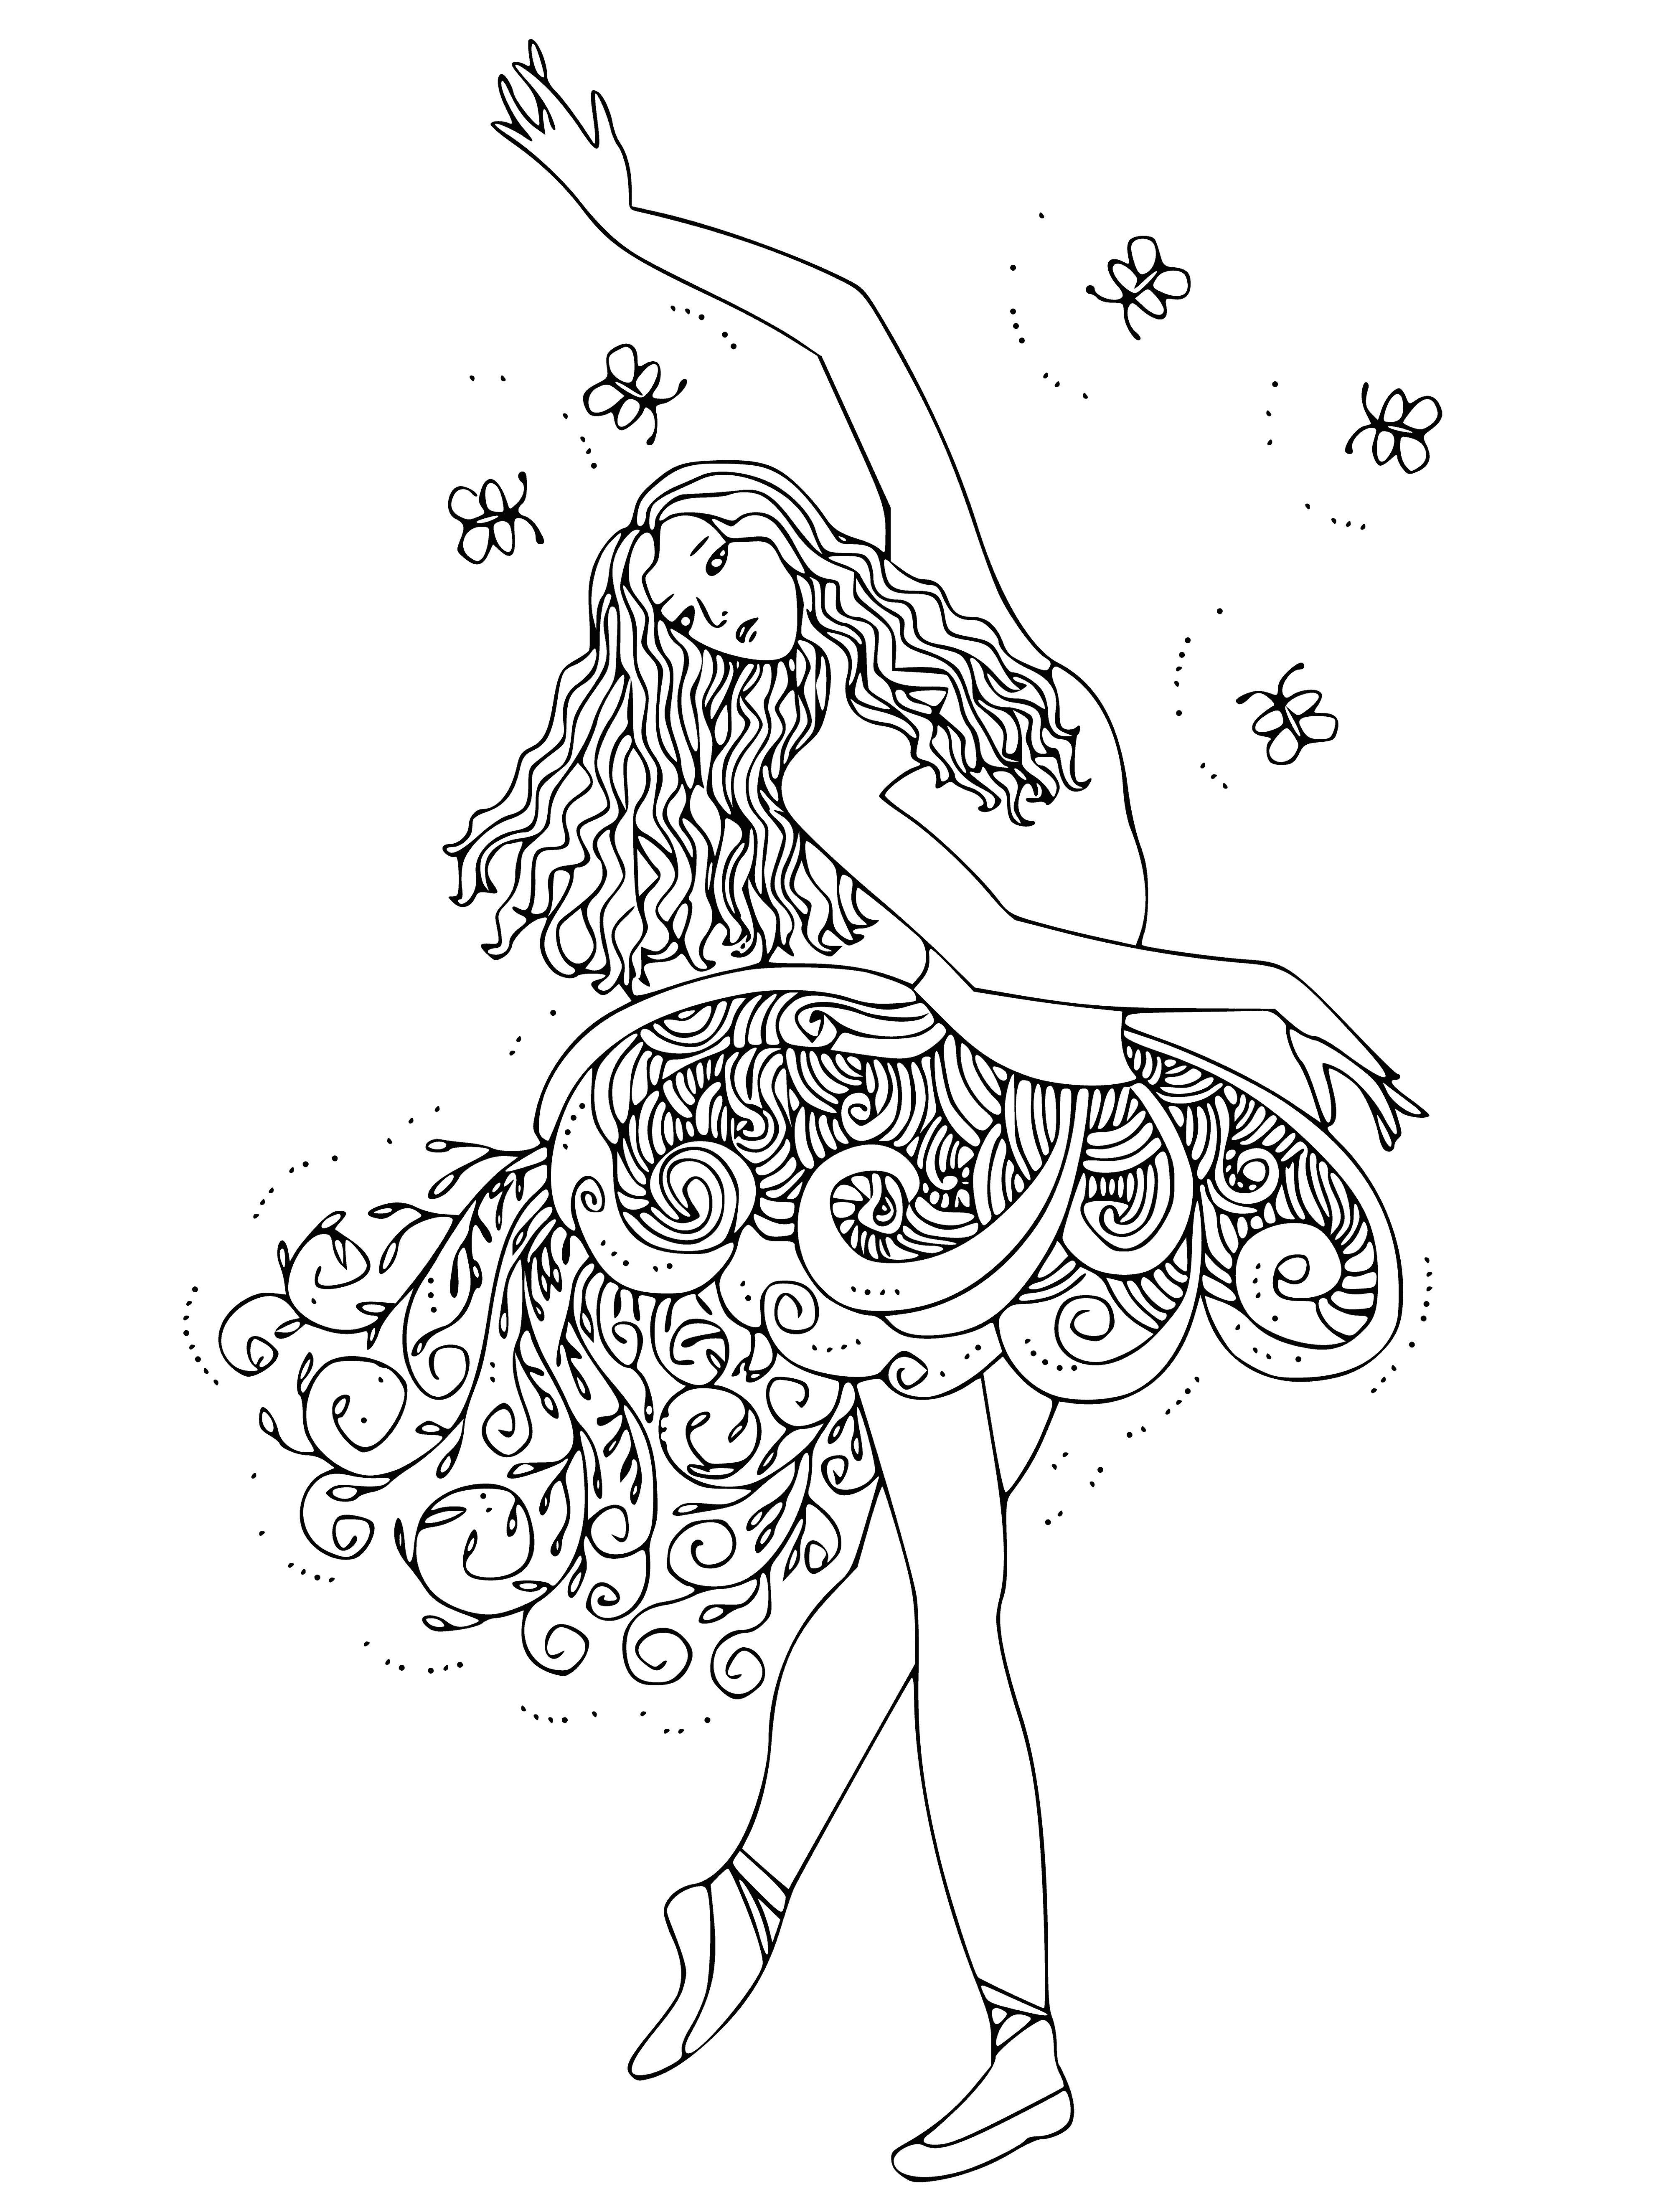 coloring page: Three ballerinas in tutus and pointes strike beautiful poses--two on their toes in the air, one kneeling on the ground with arms outstretched.